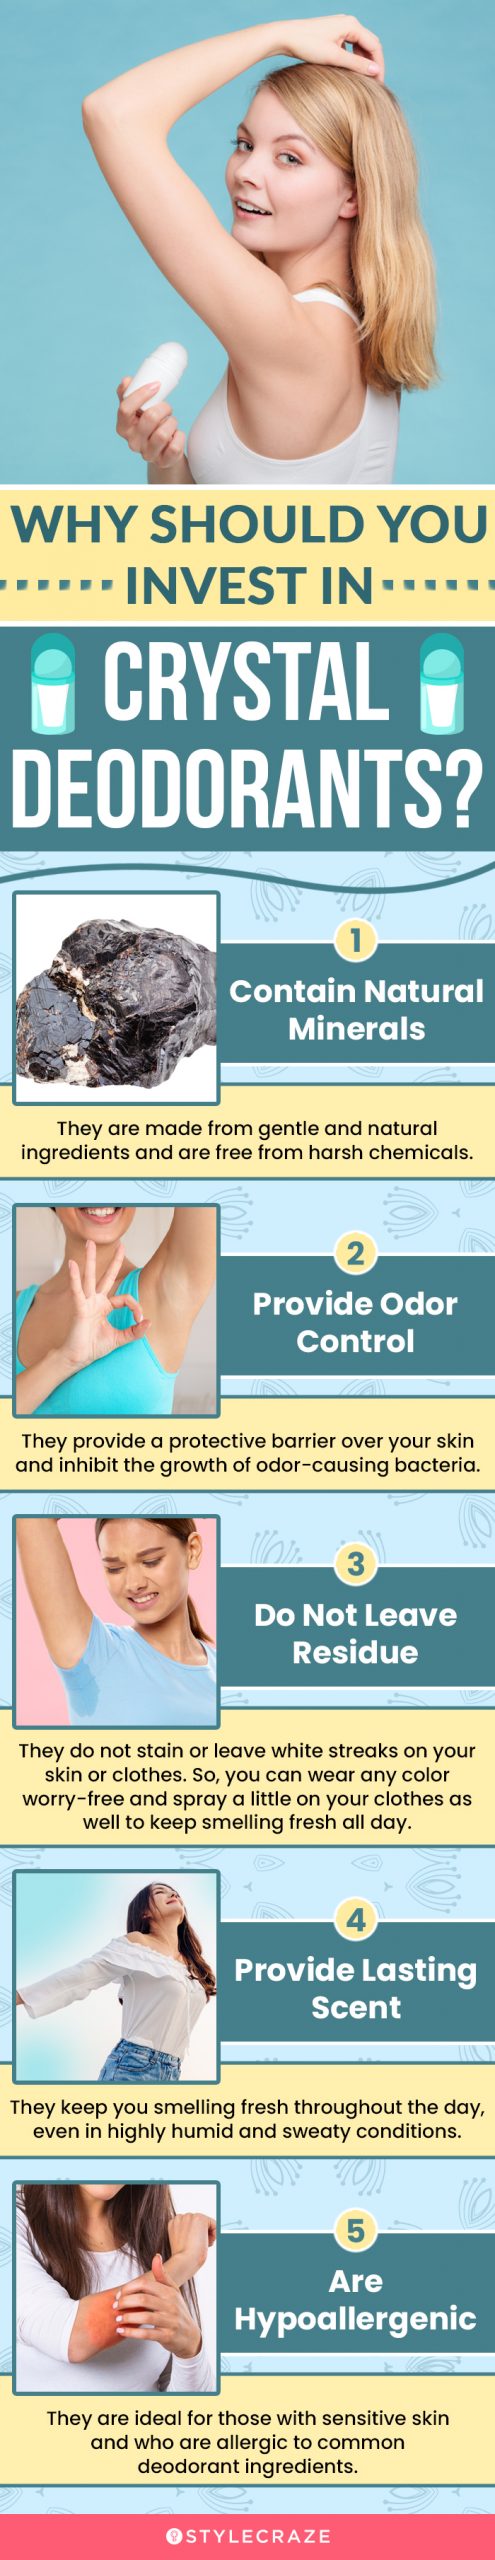 Why Should You Invest In Crystal Deodorants? (infographic)